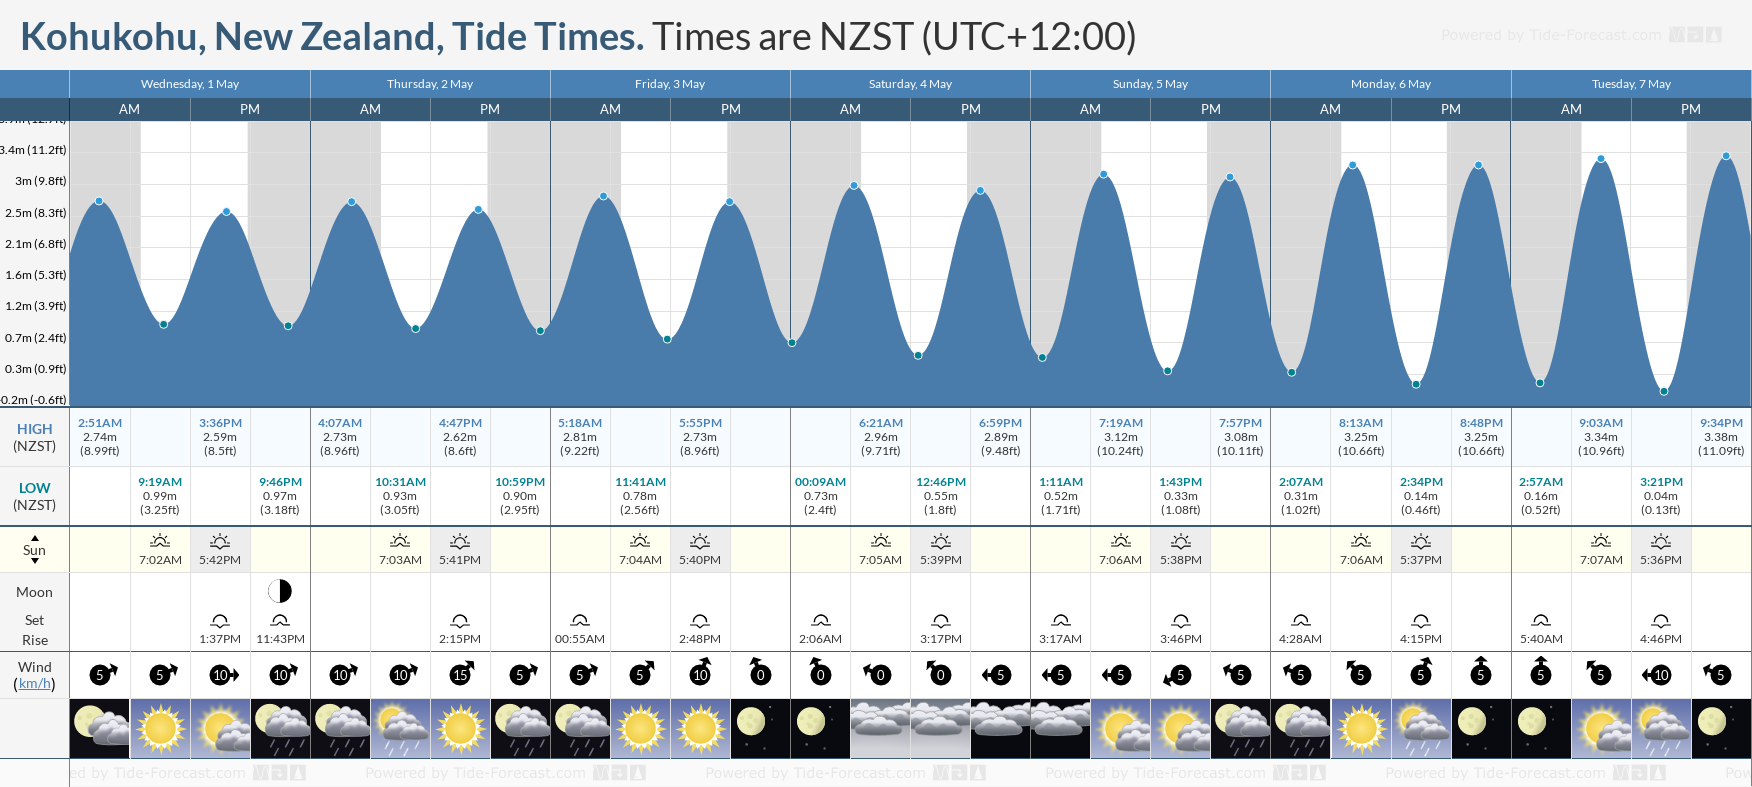 Kohukohu, New Zealand Tide Chart including high and low tide tide times for the next 7 days